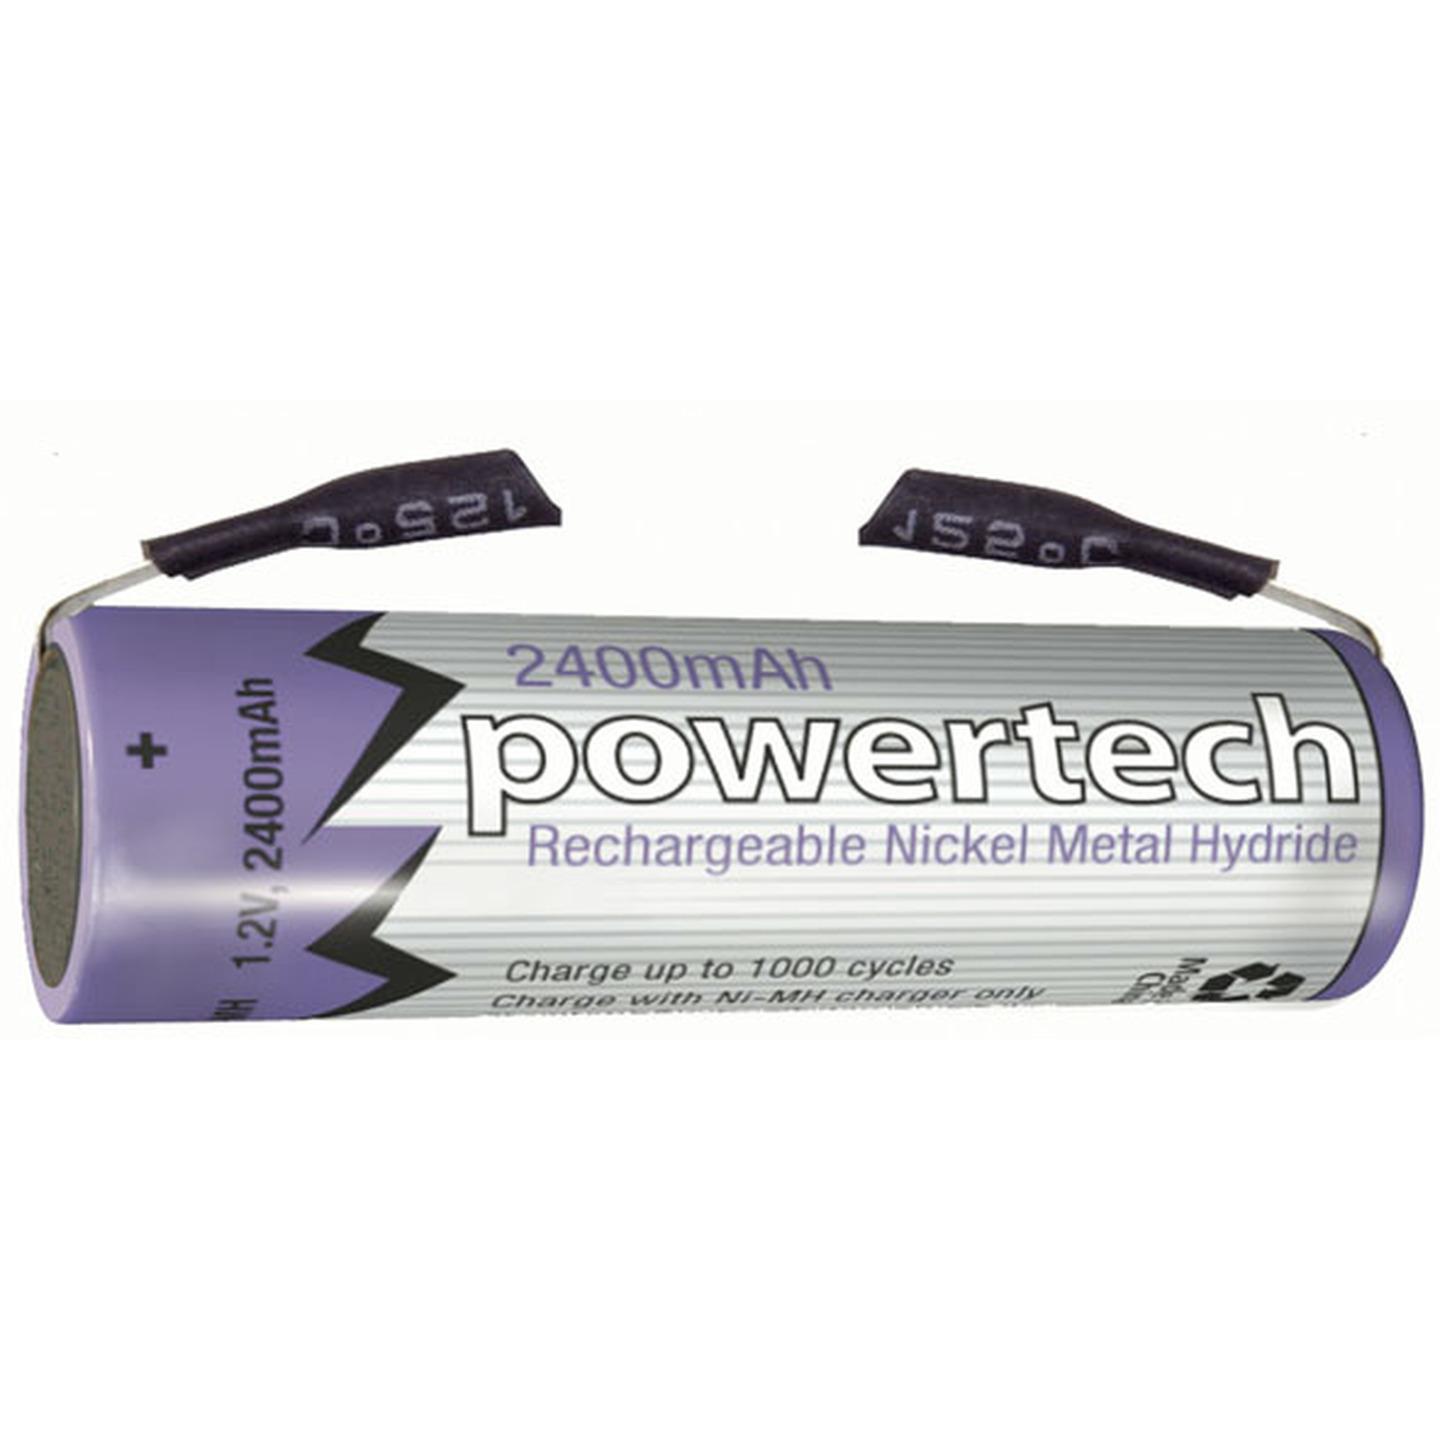 1.2V AA 2400mAH Rechargeable Ni-MH Powertech Battery - Solder Tag